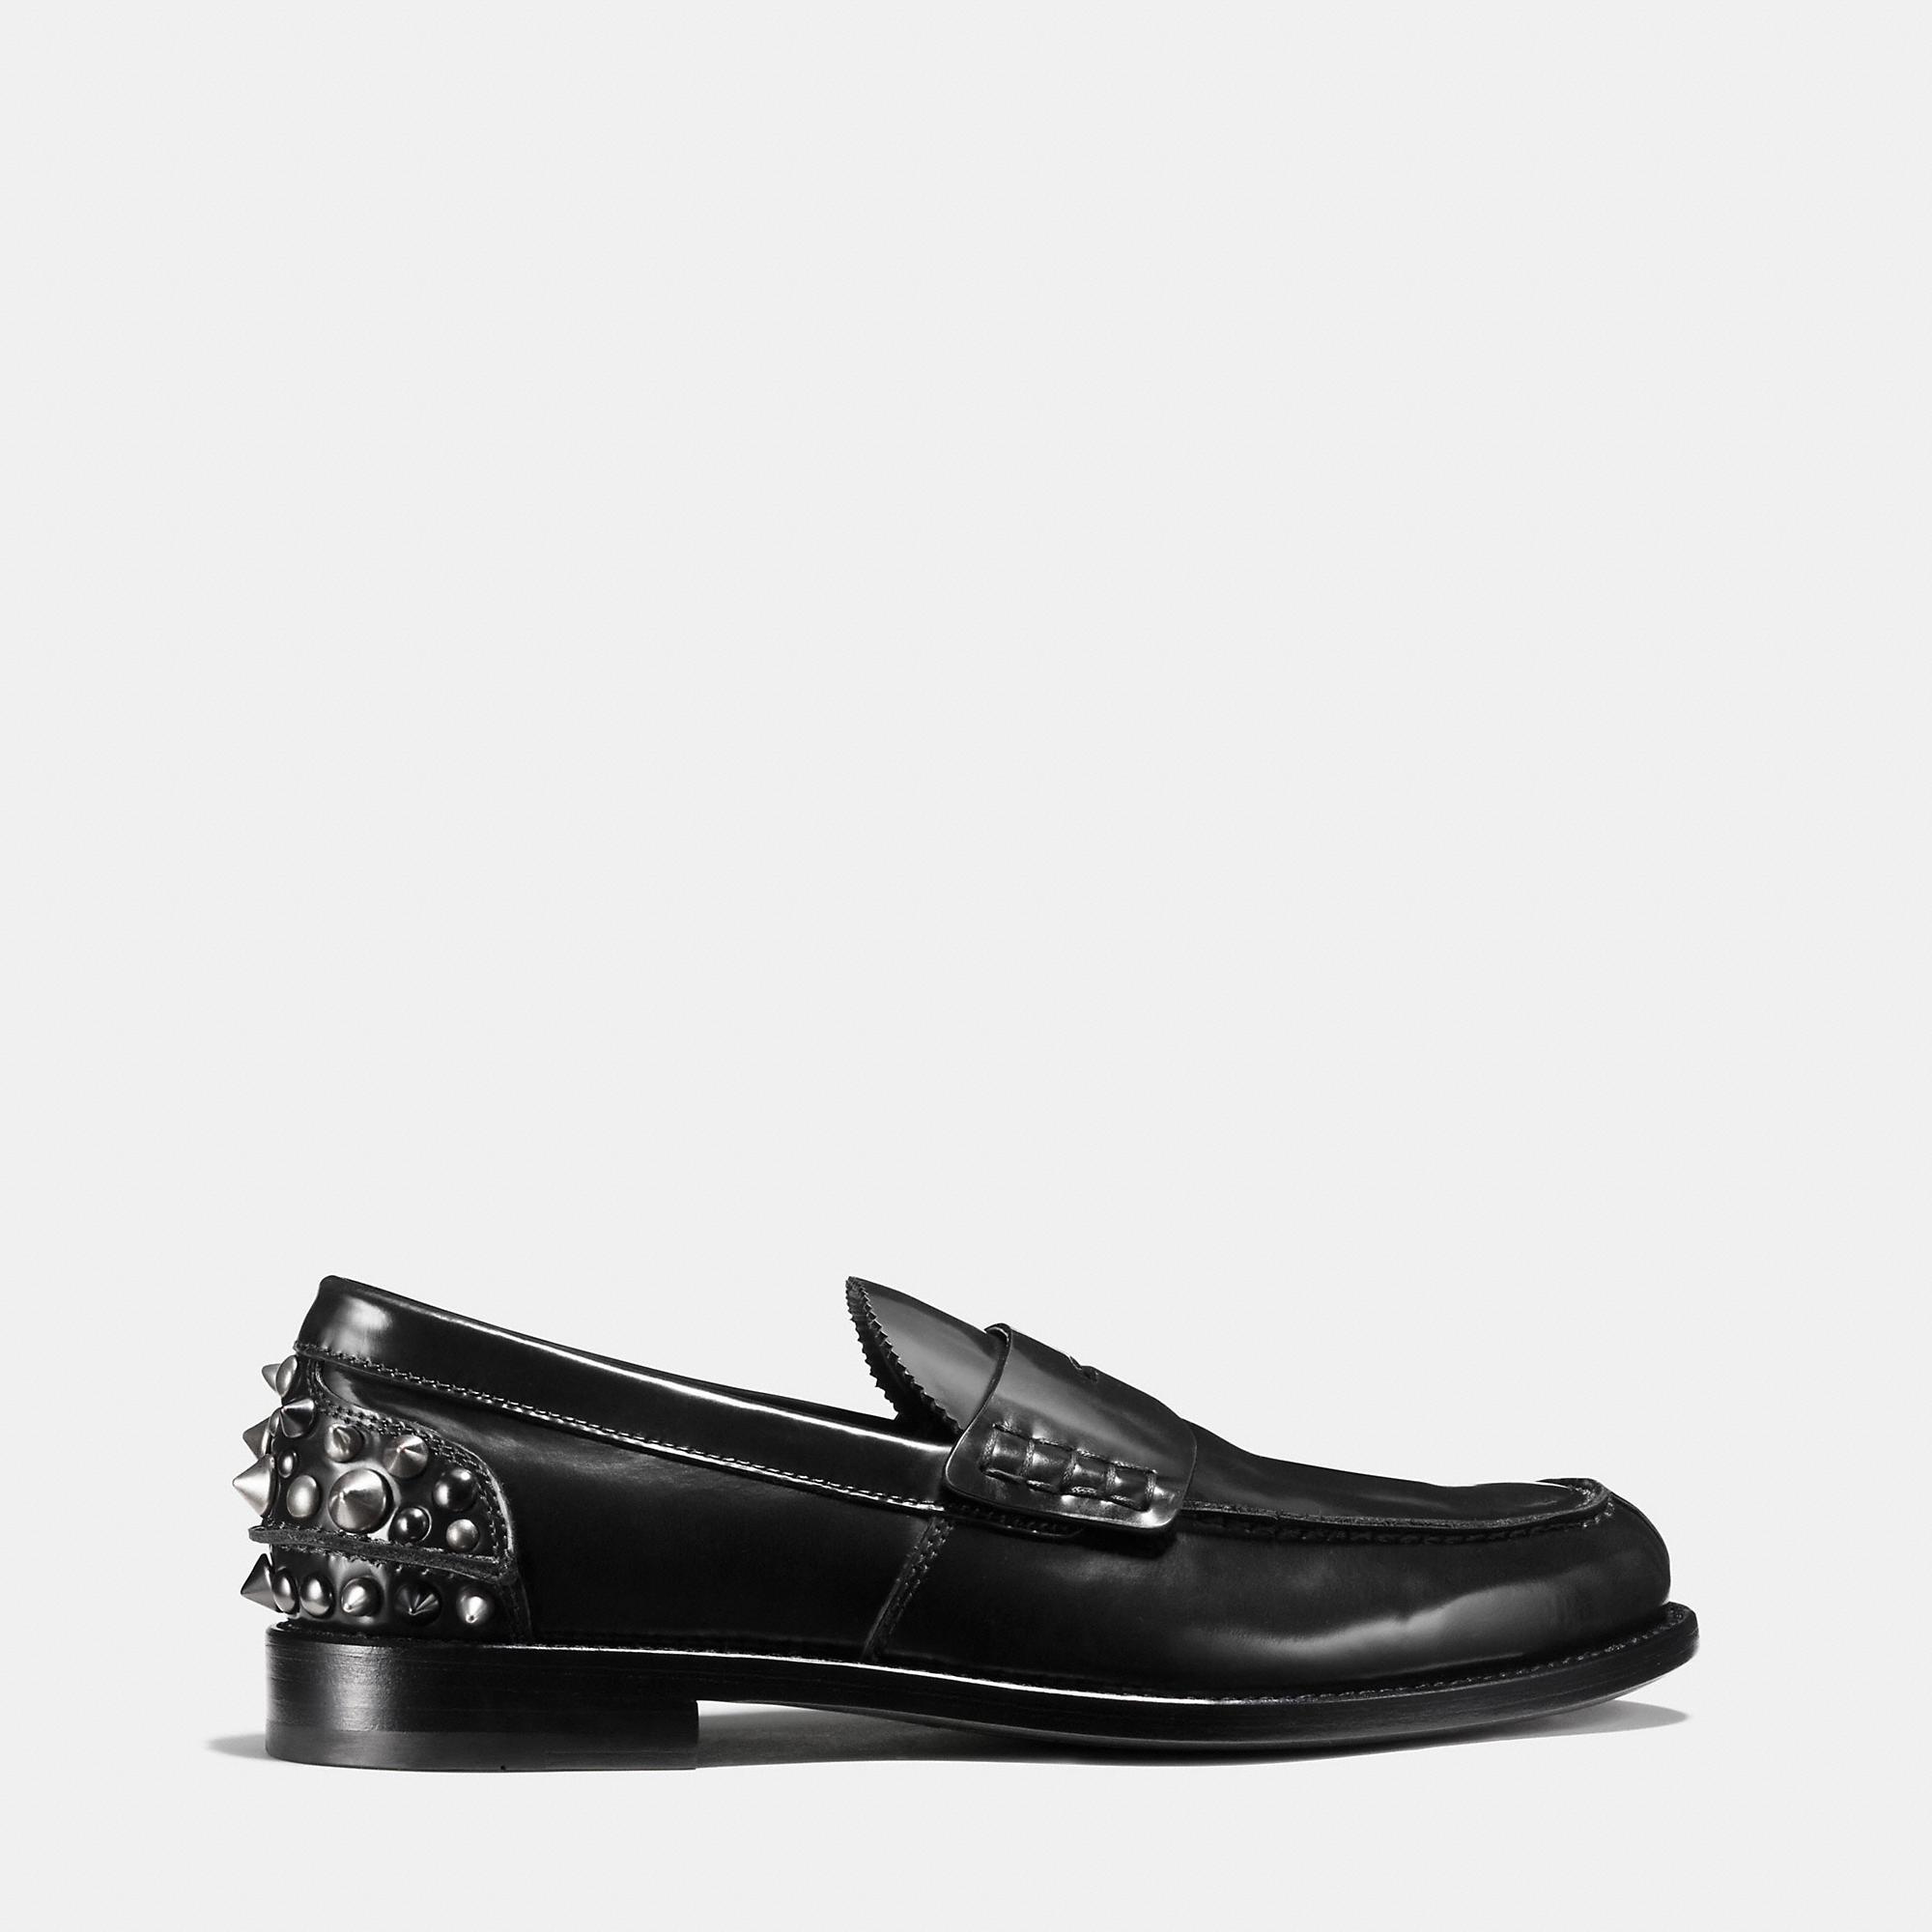 COACH Leather Studded Loafer in Black 